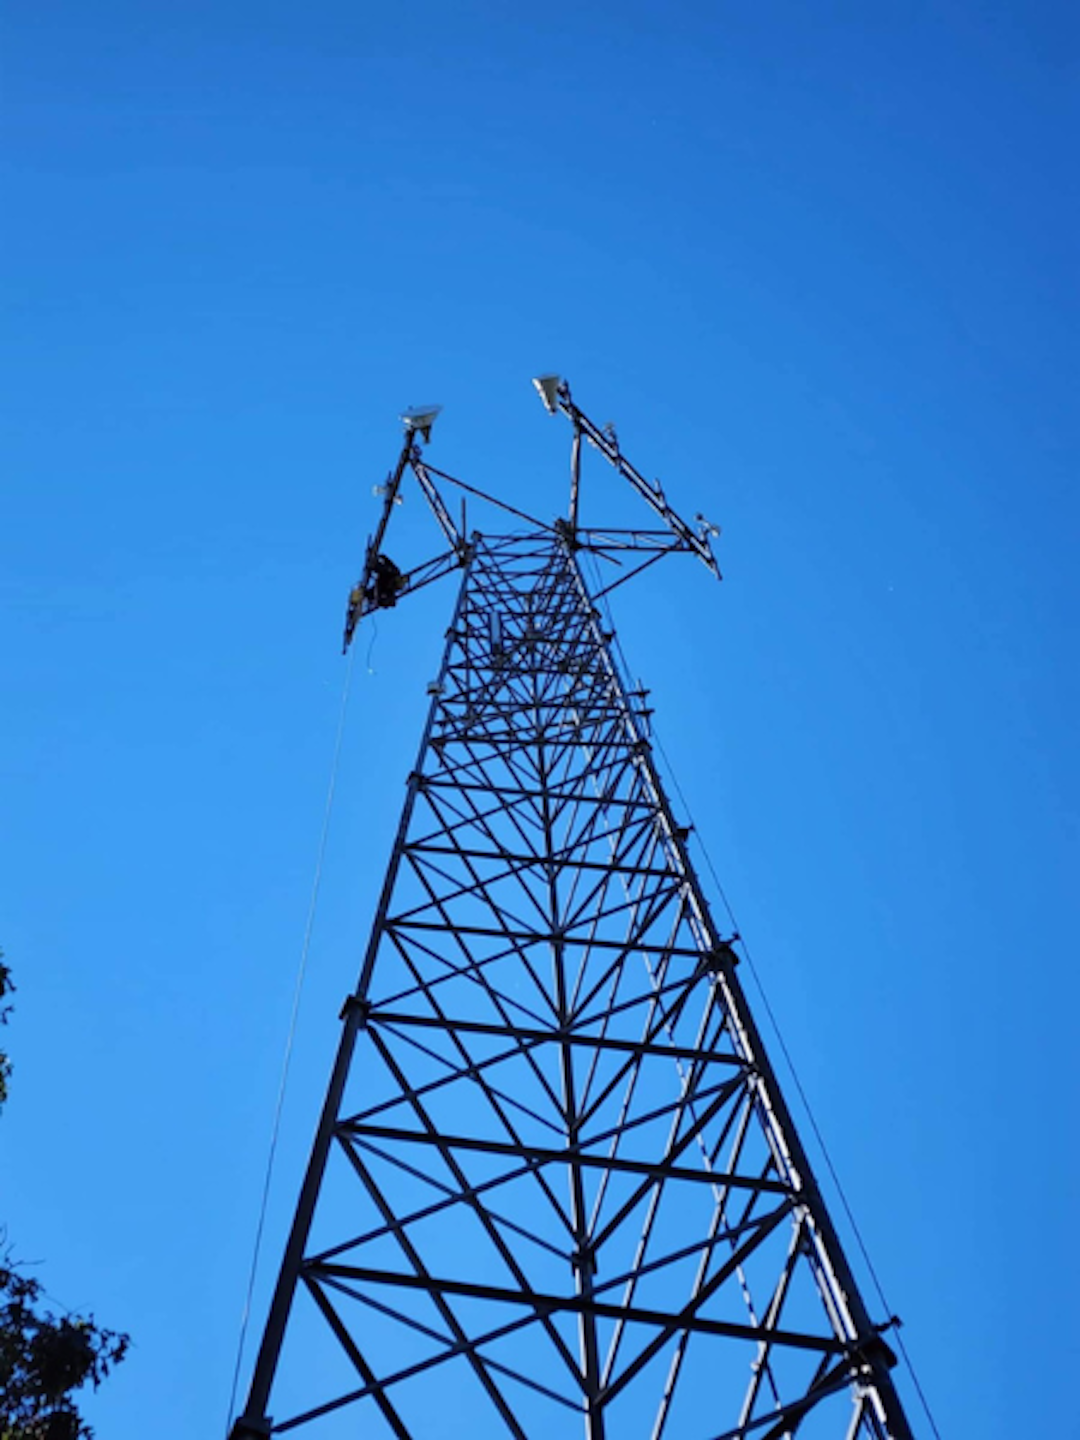 site antennas on a tower